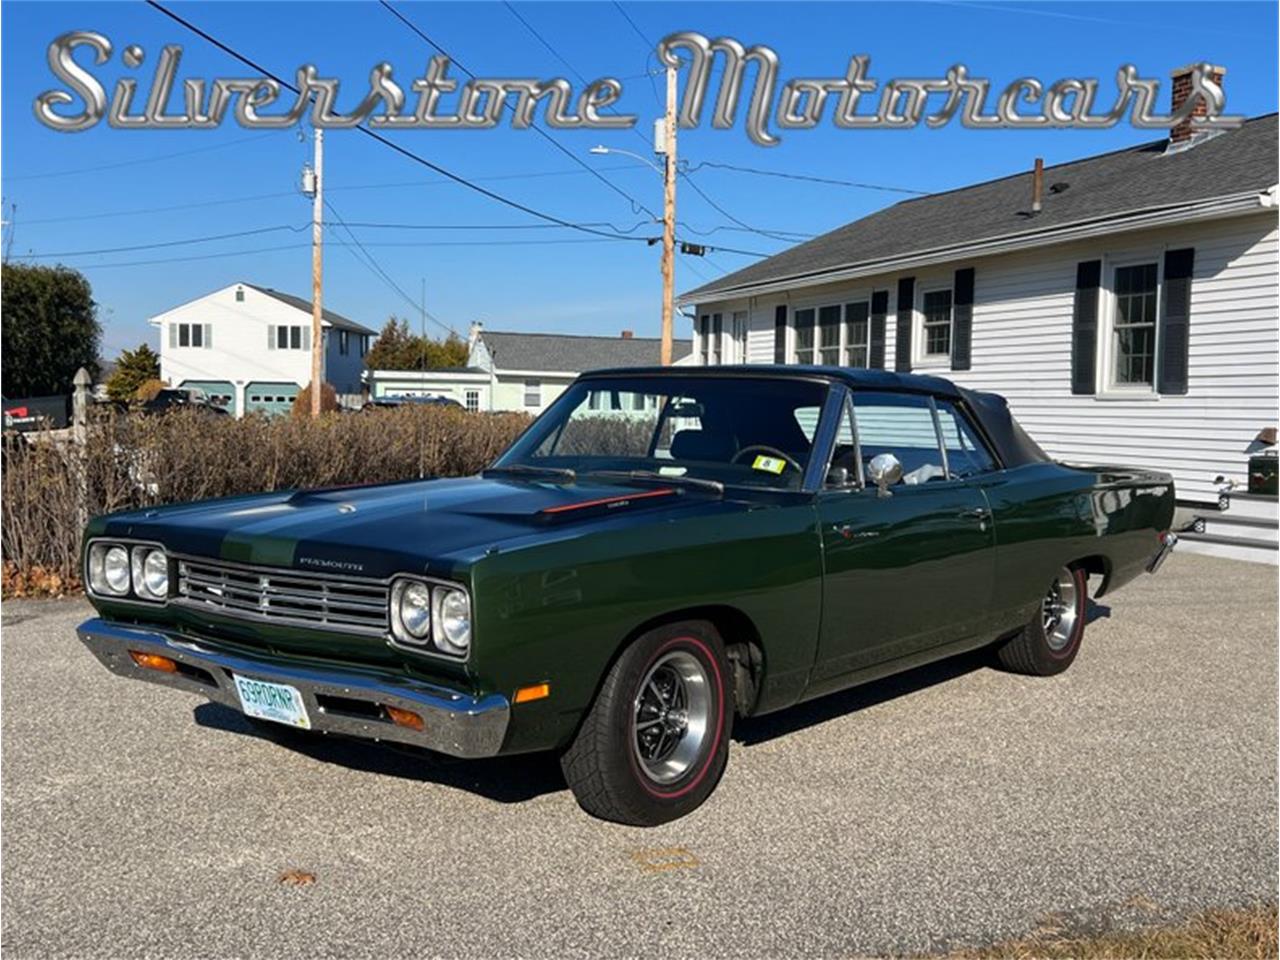 For Sale: 1969 Plymouth Road Runner in North Andover, Massachusetts for sale in North Andover, MA